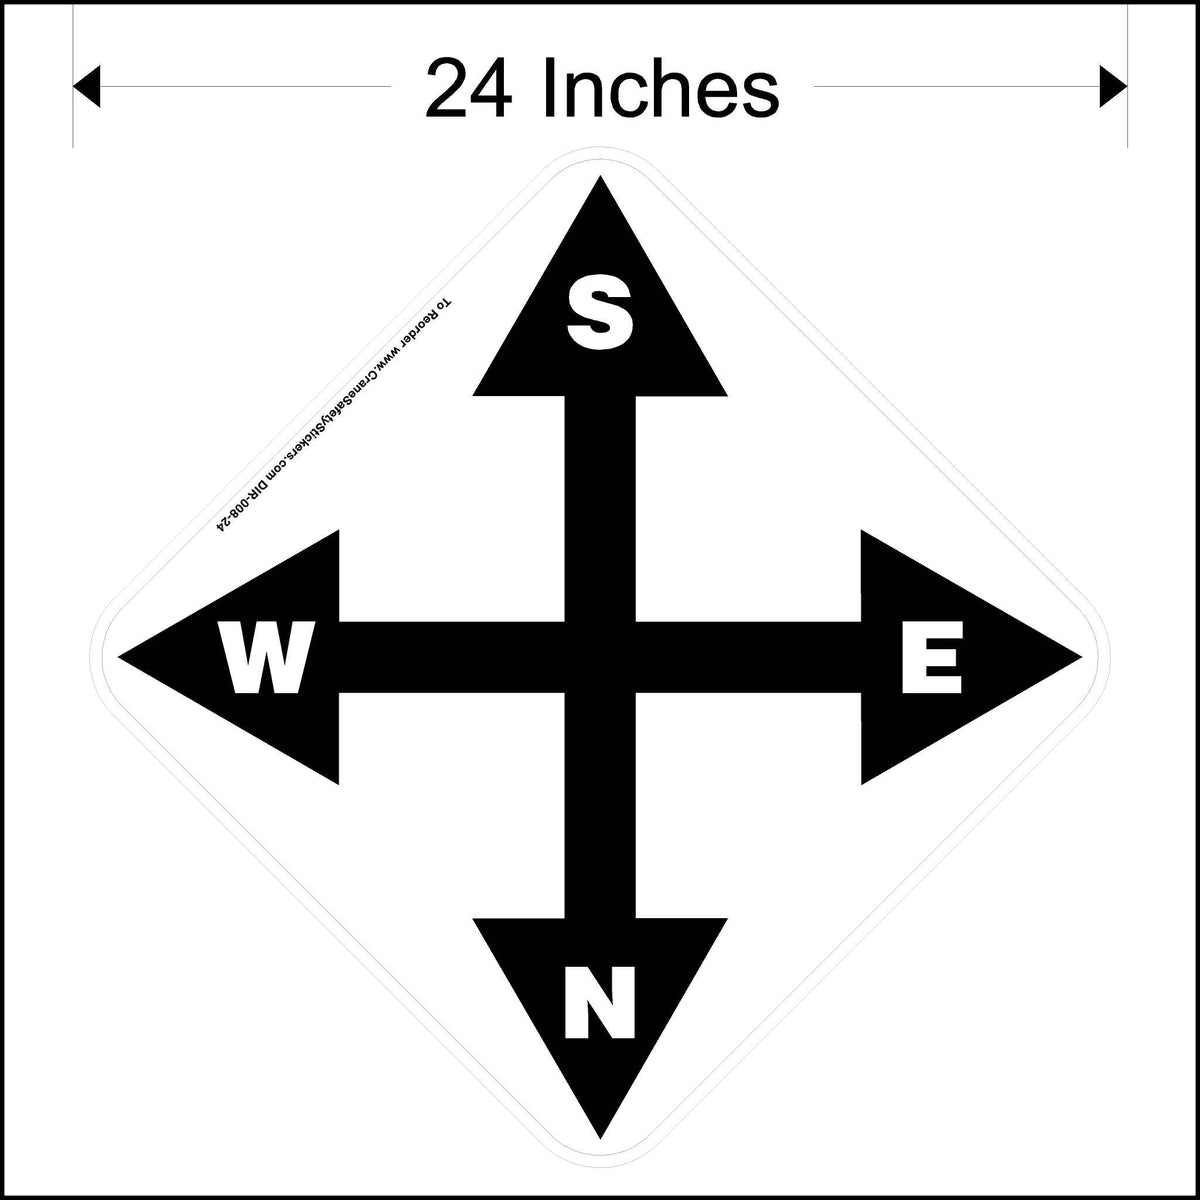 24 Inch South, east, north, and west overhead crane directional decal. Printed in black and white.